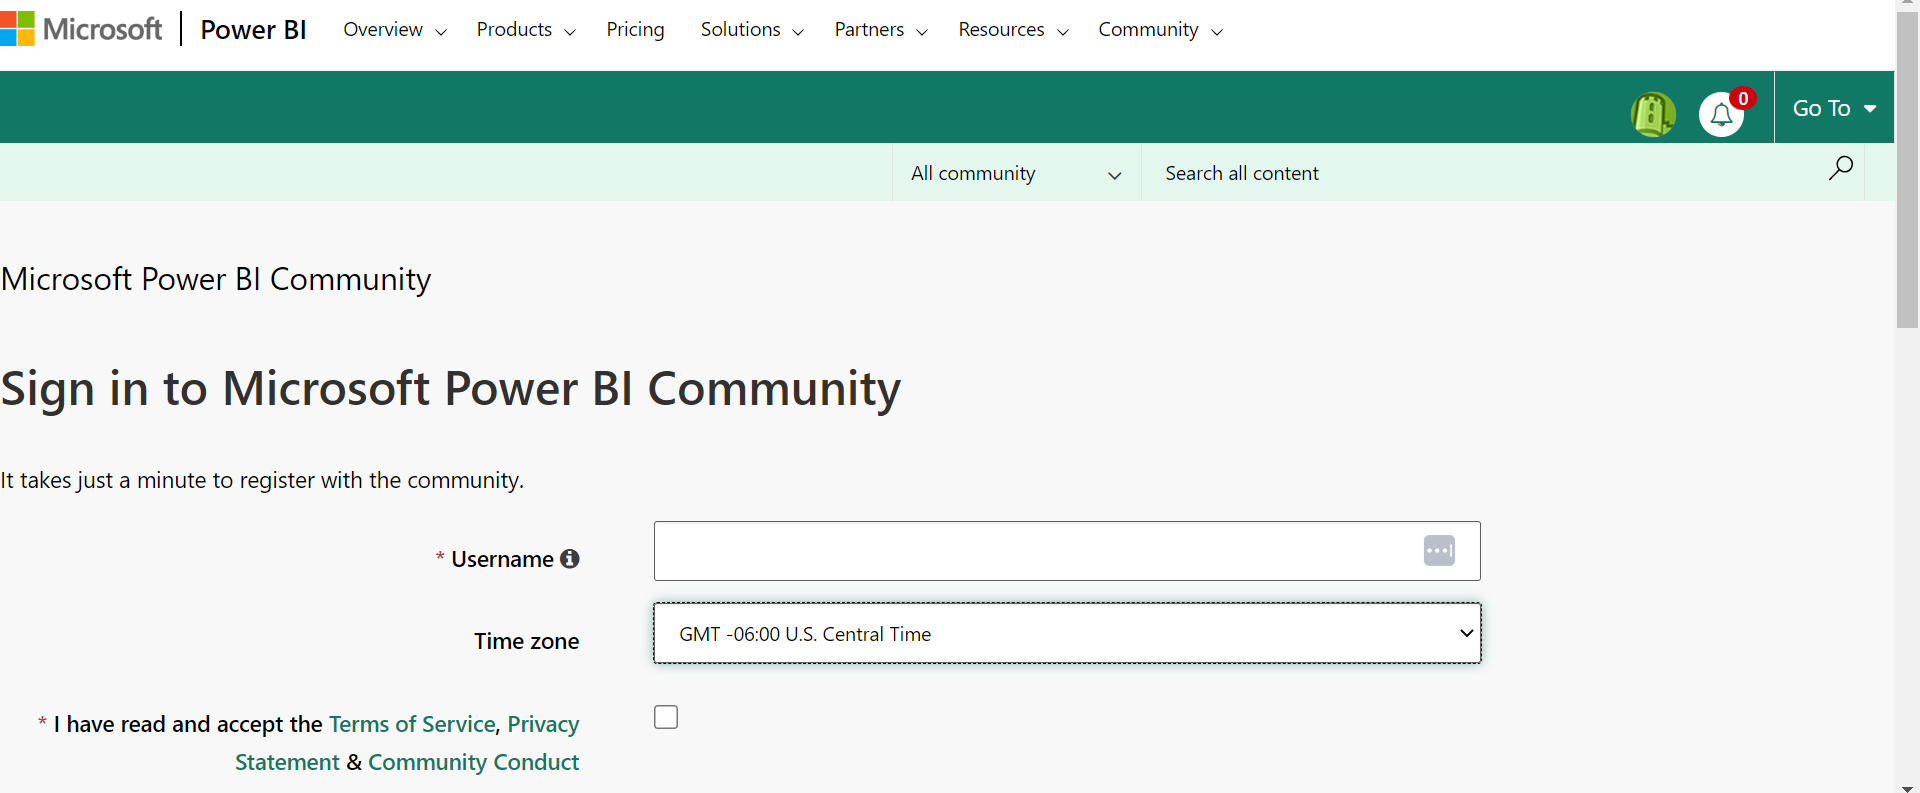 How to sign in to the Microsoft Power BI community